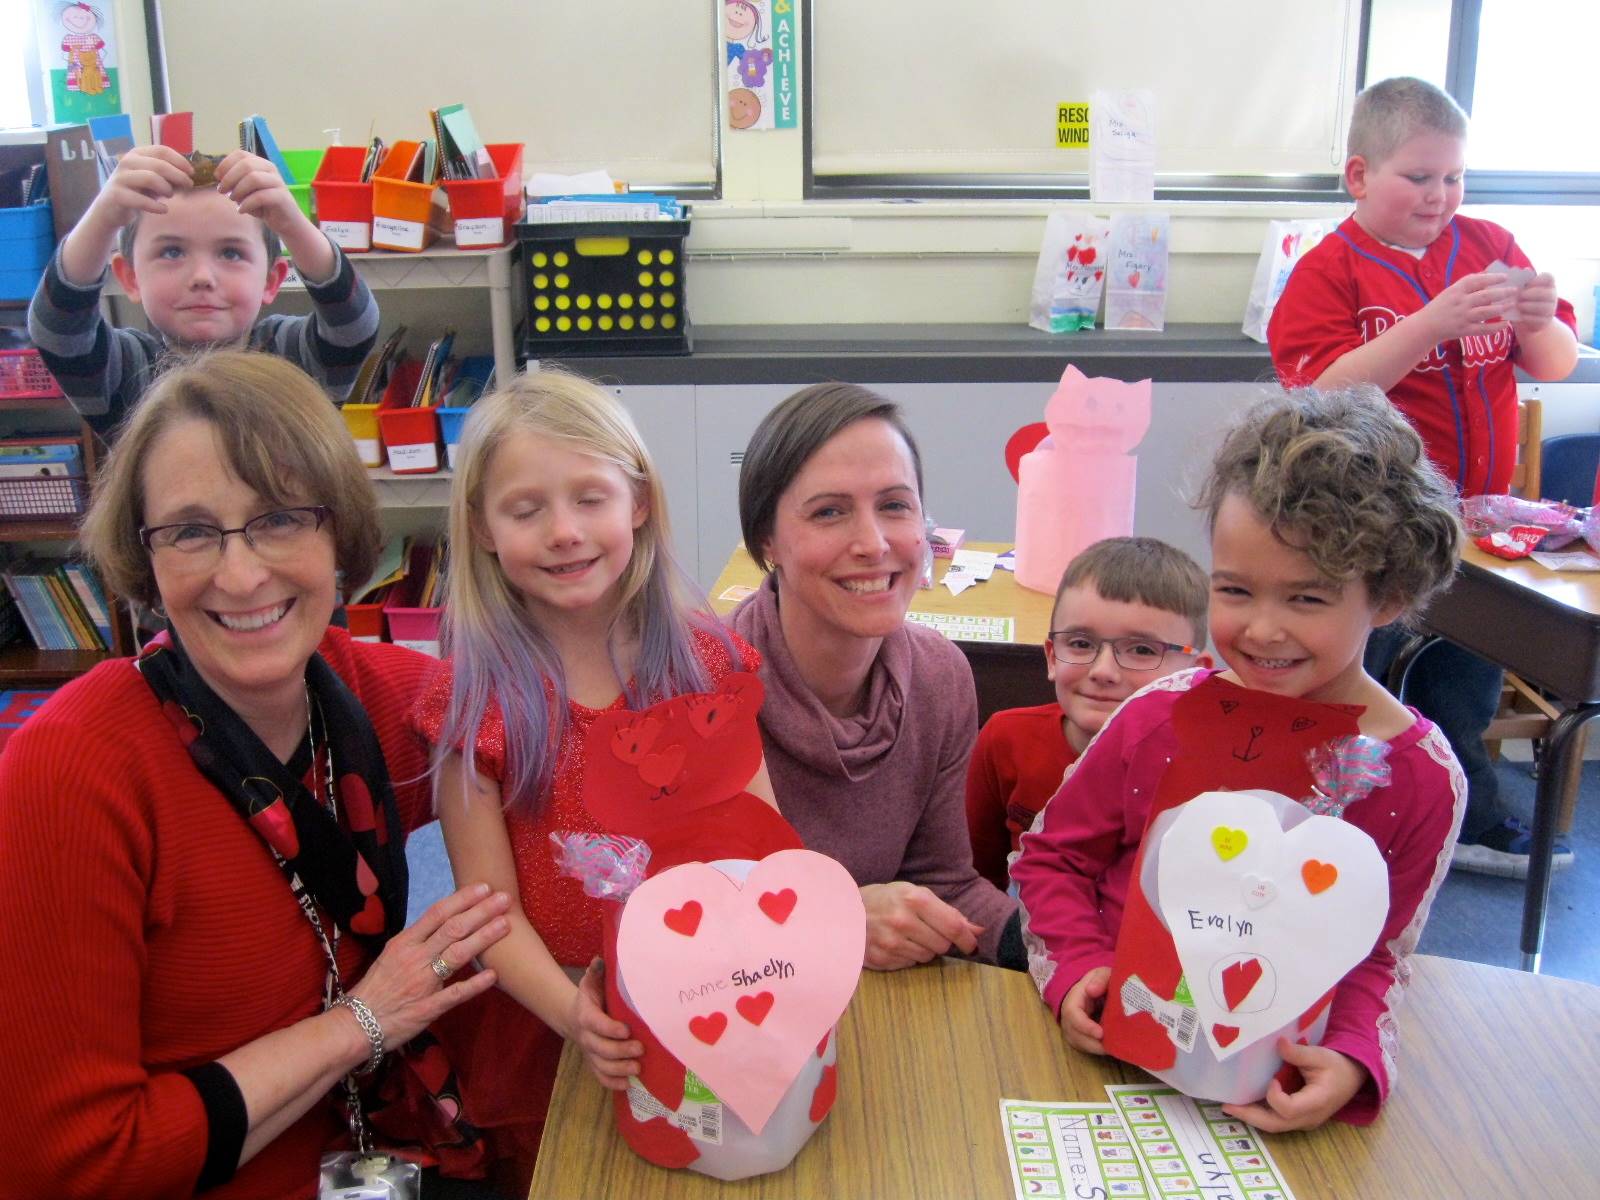 A teacher and mom with 2 students on Valentine's day.